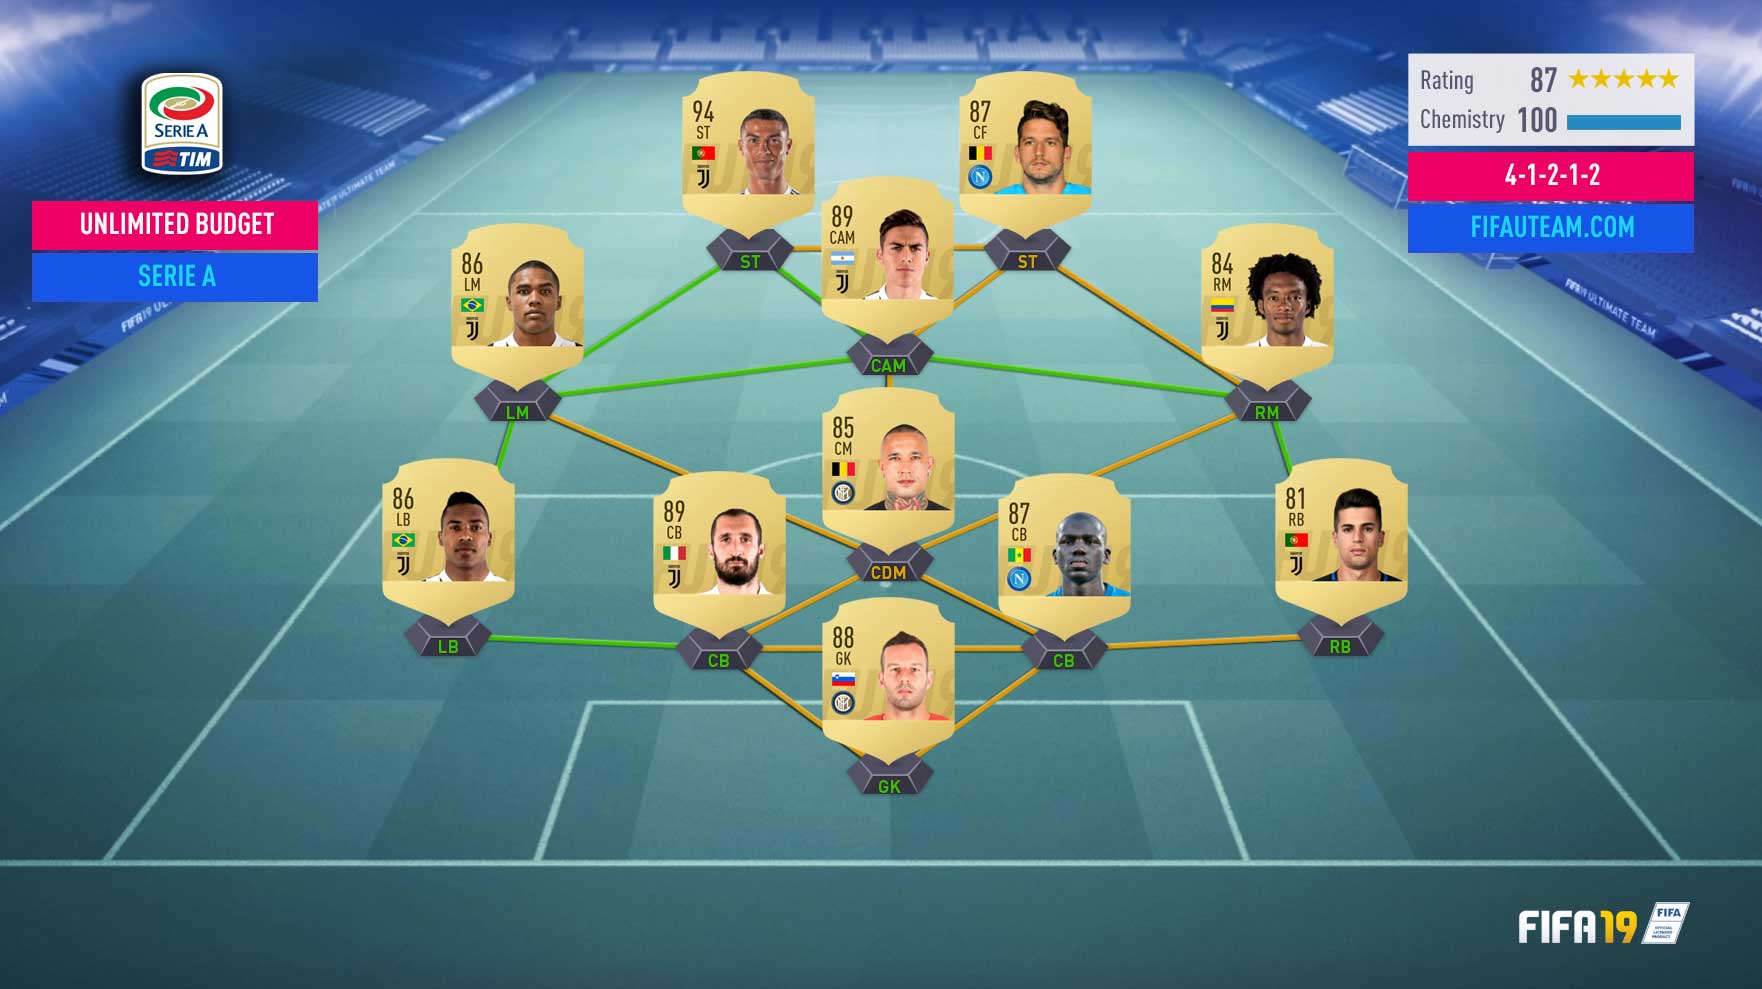 The Best FIFA 19 League to Play on FIFA 19 Ultimate Team